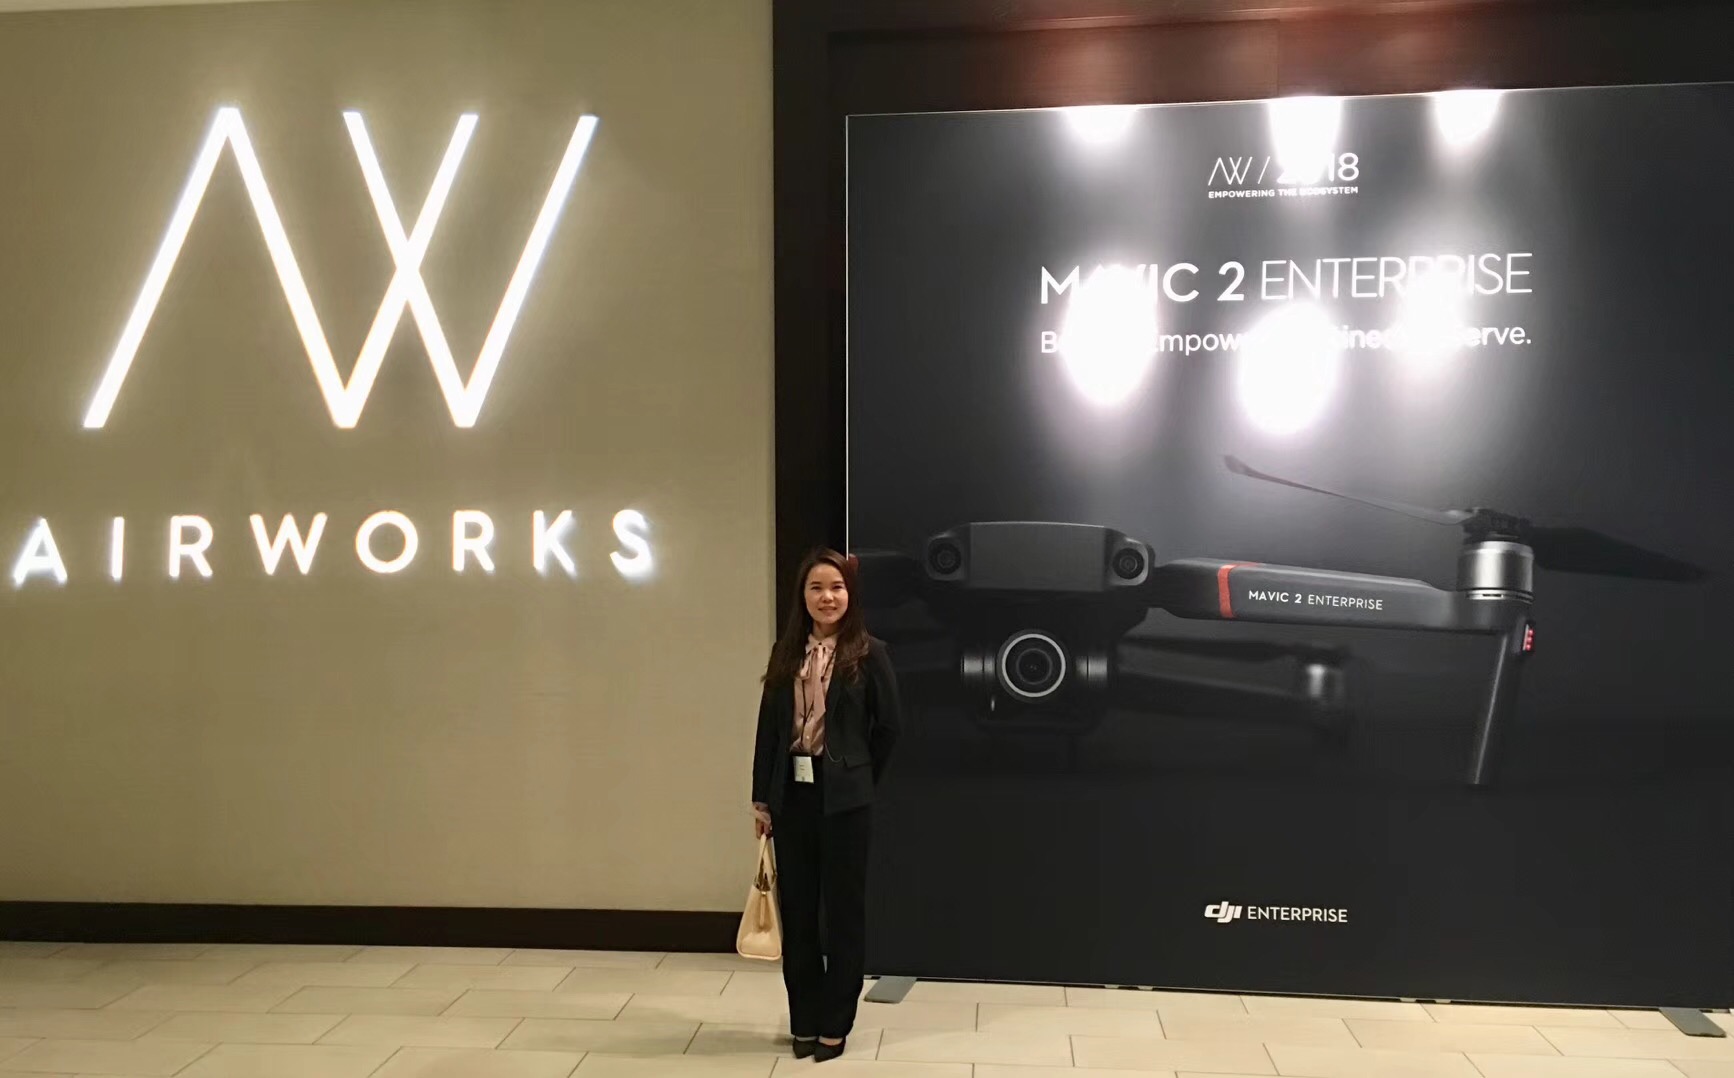 Viewpro Attended Airworks 2018 in Dallas